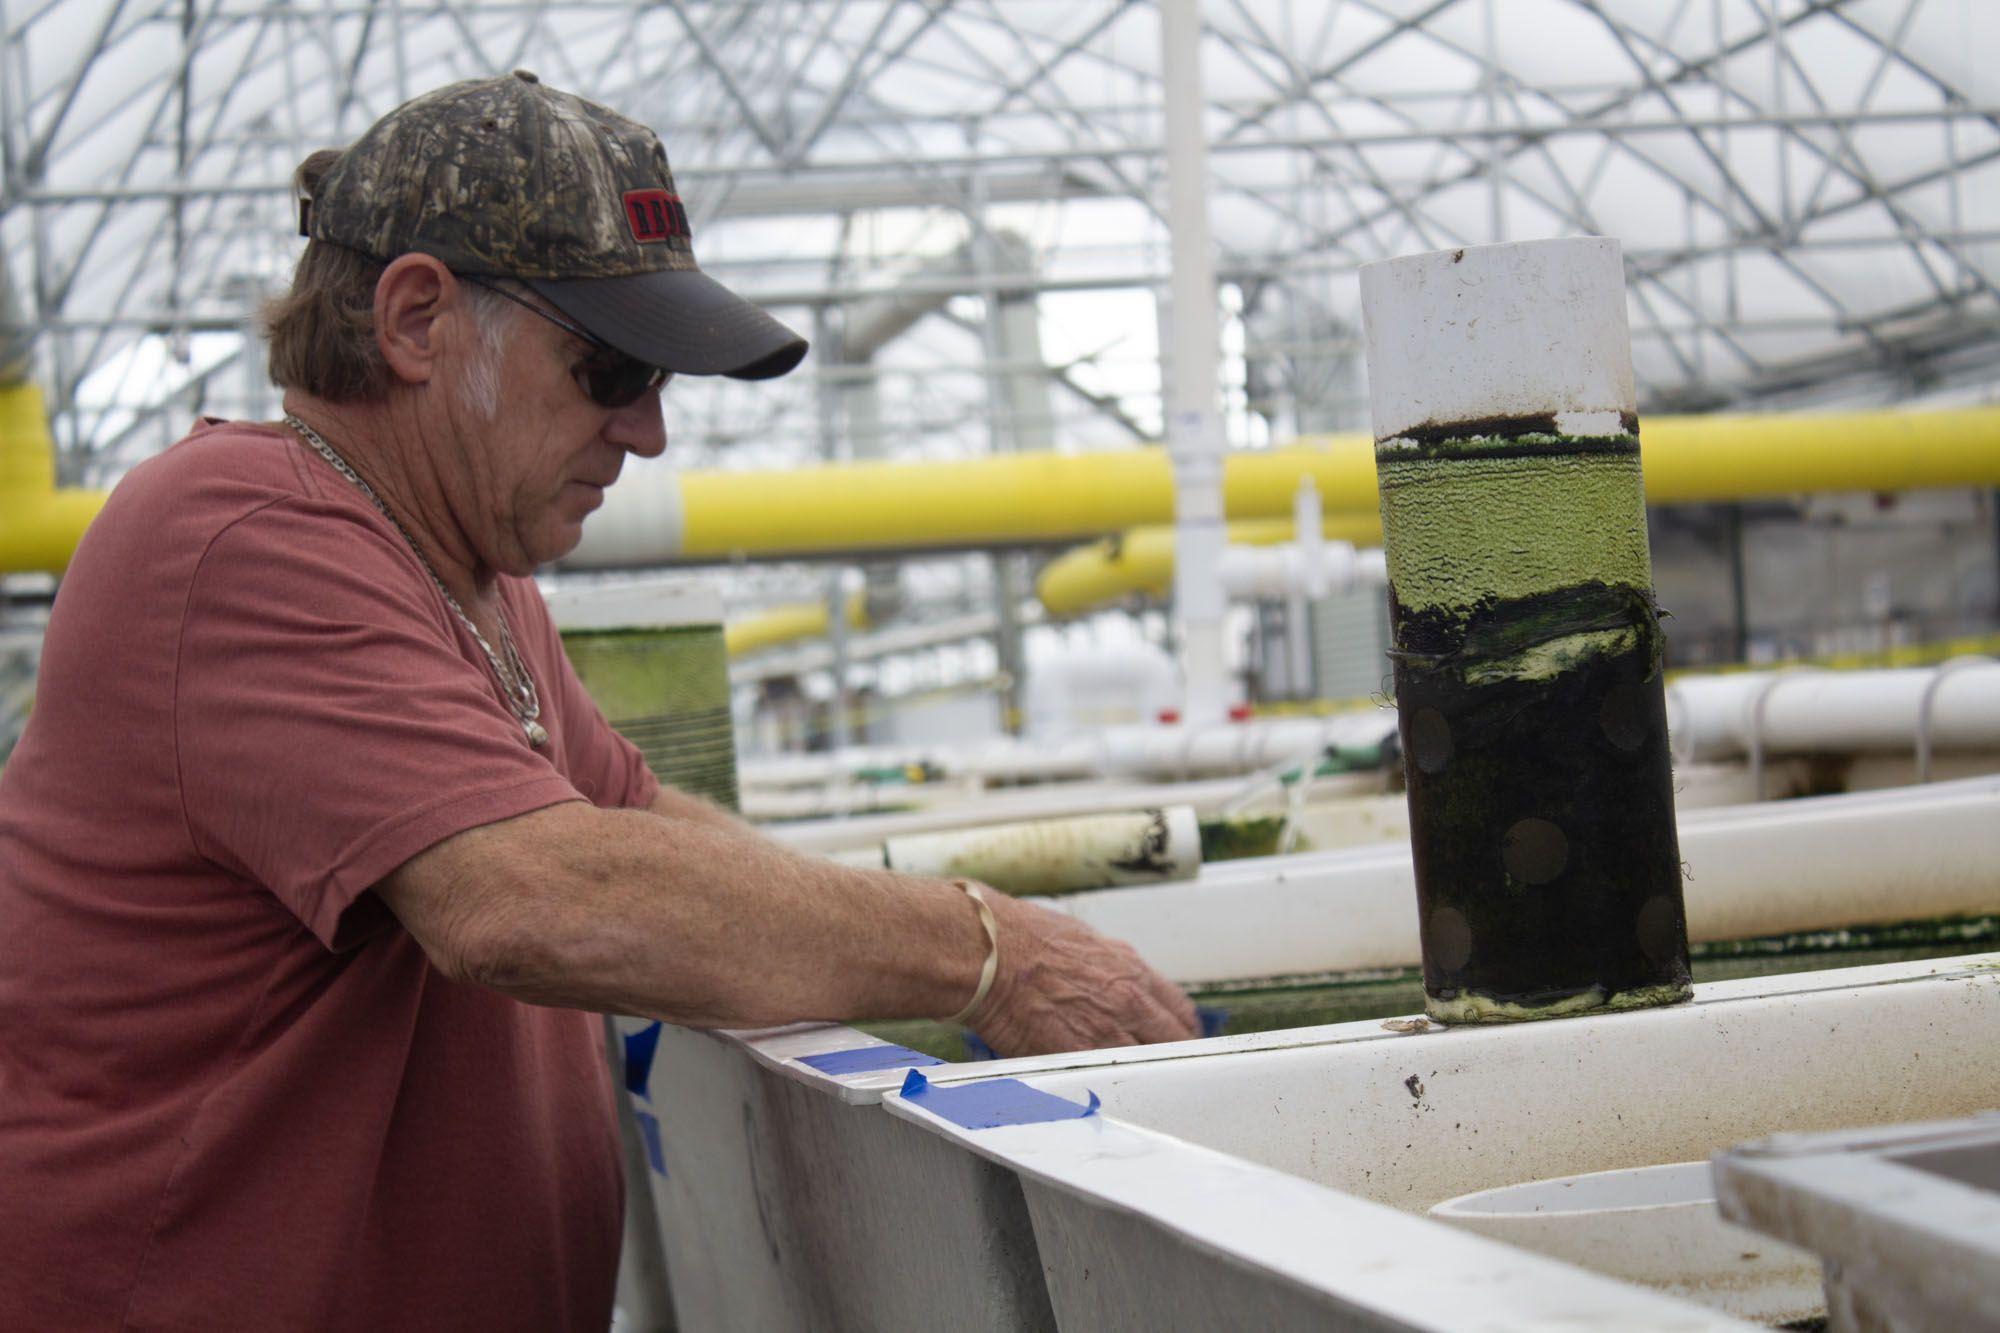 Eagle's Catch general manager Dave Block scoops tilapia out of a tank, and into a sorter to separate the fish by size.